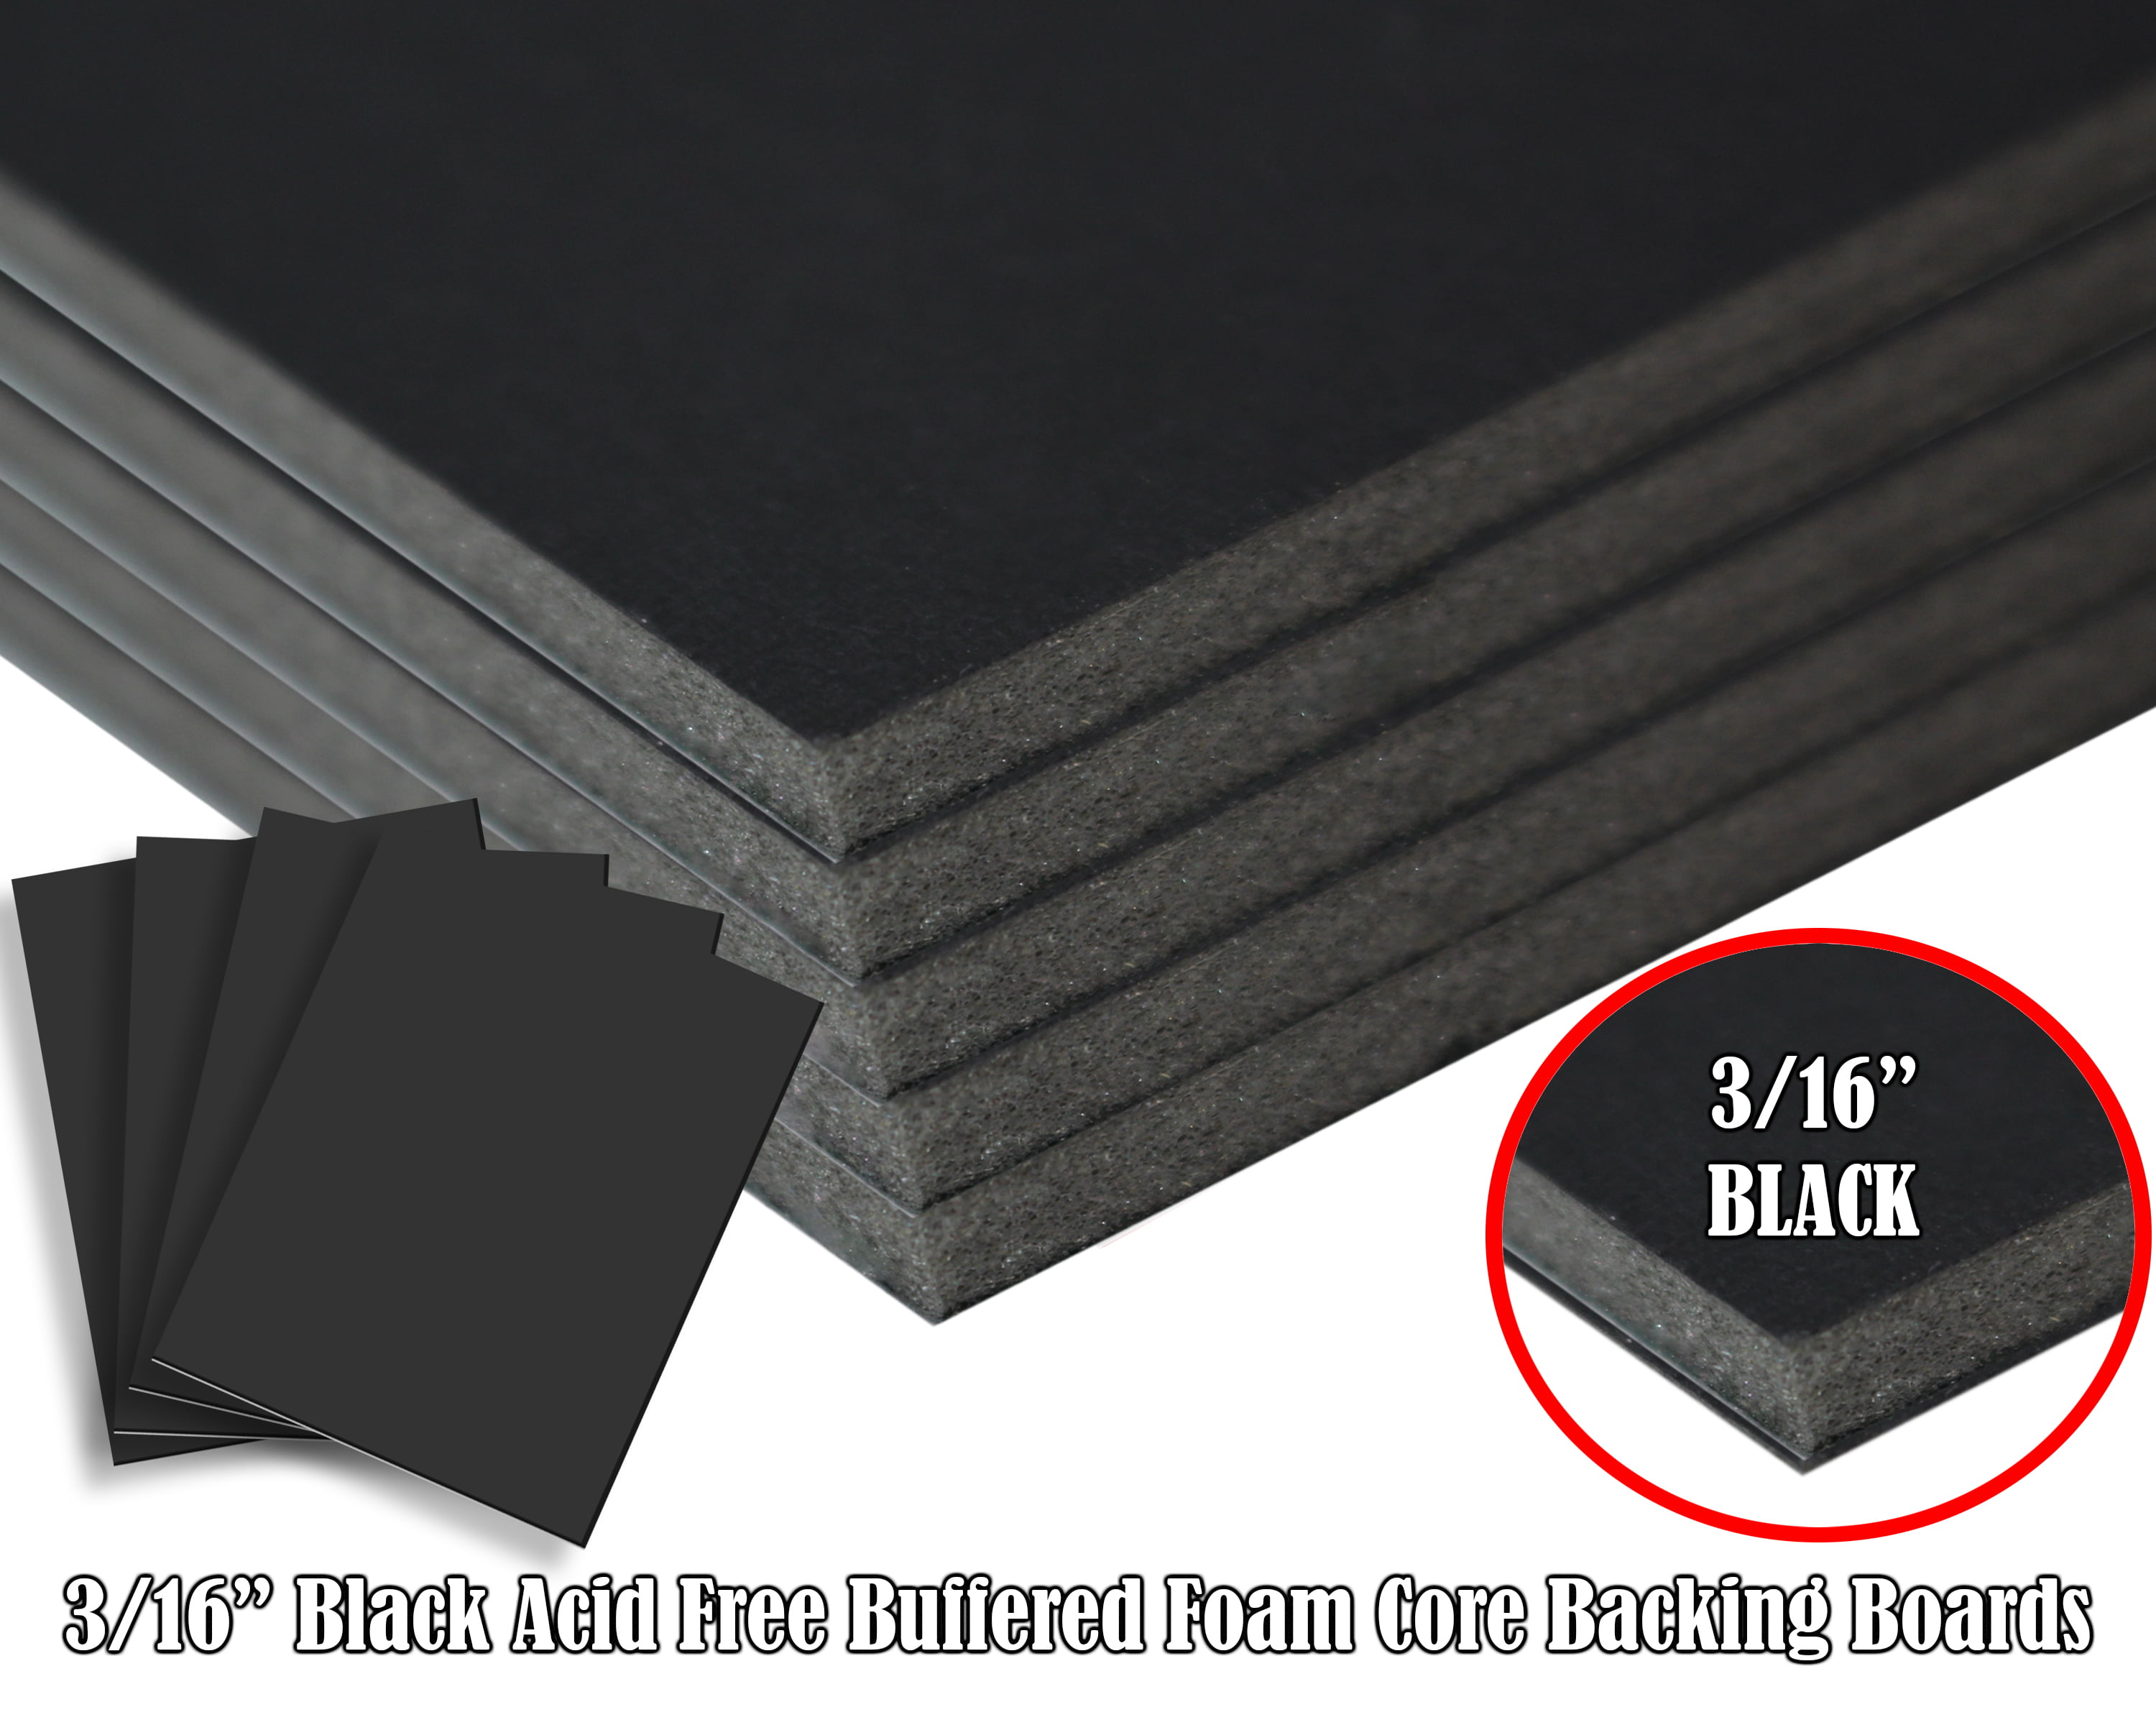 Foam Core Backing Board 3/16 Black 24x36- 10 Pack. Many Sizes Available.  Acid Free Buffered Craft Poster Board for Signs, Presentations, School